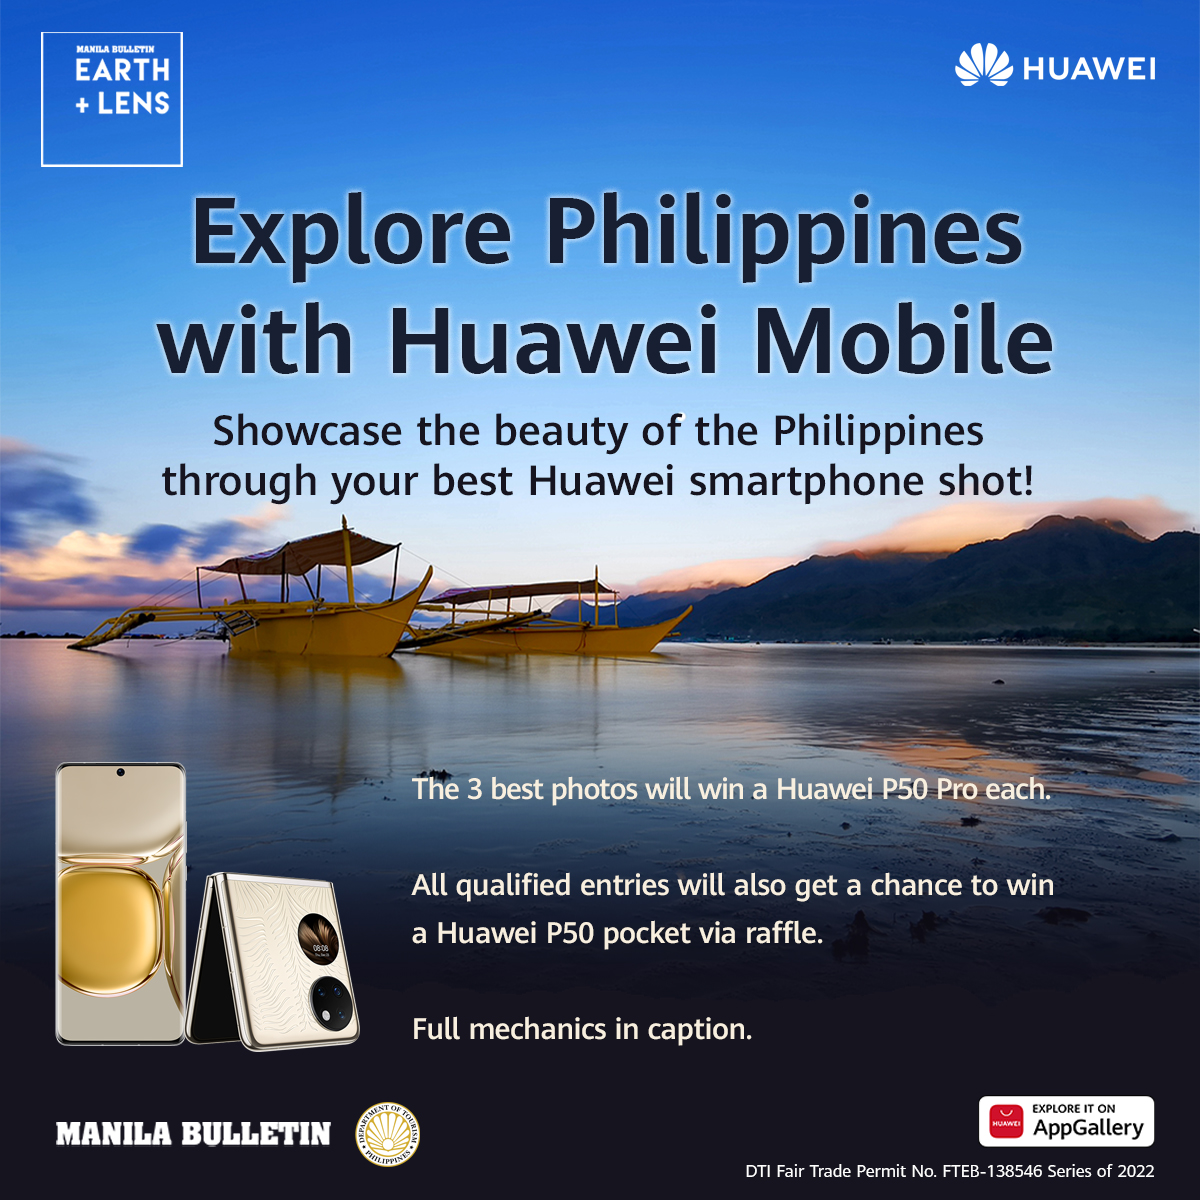 Explore the Philippines with Huawei Mobile